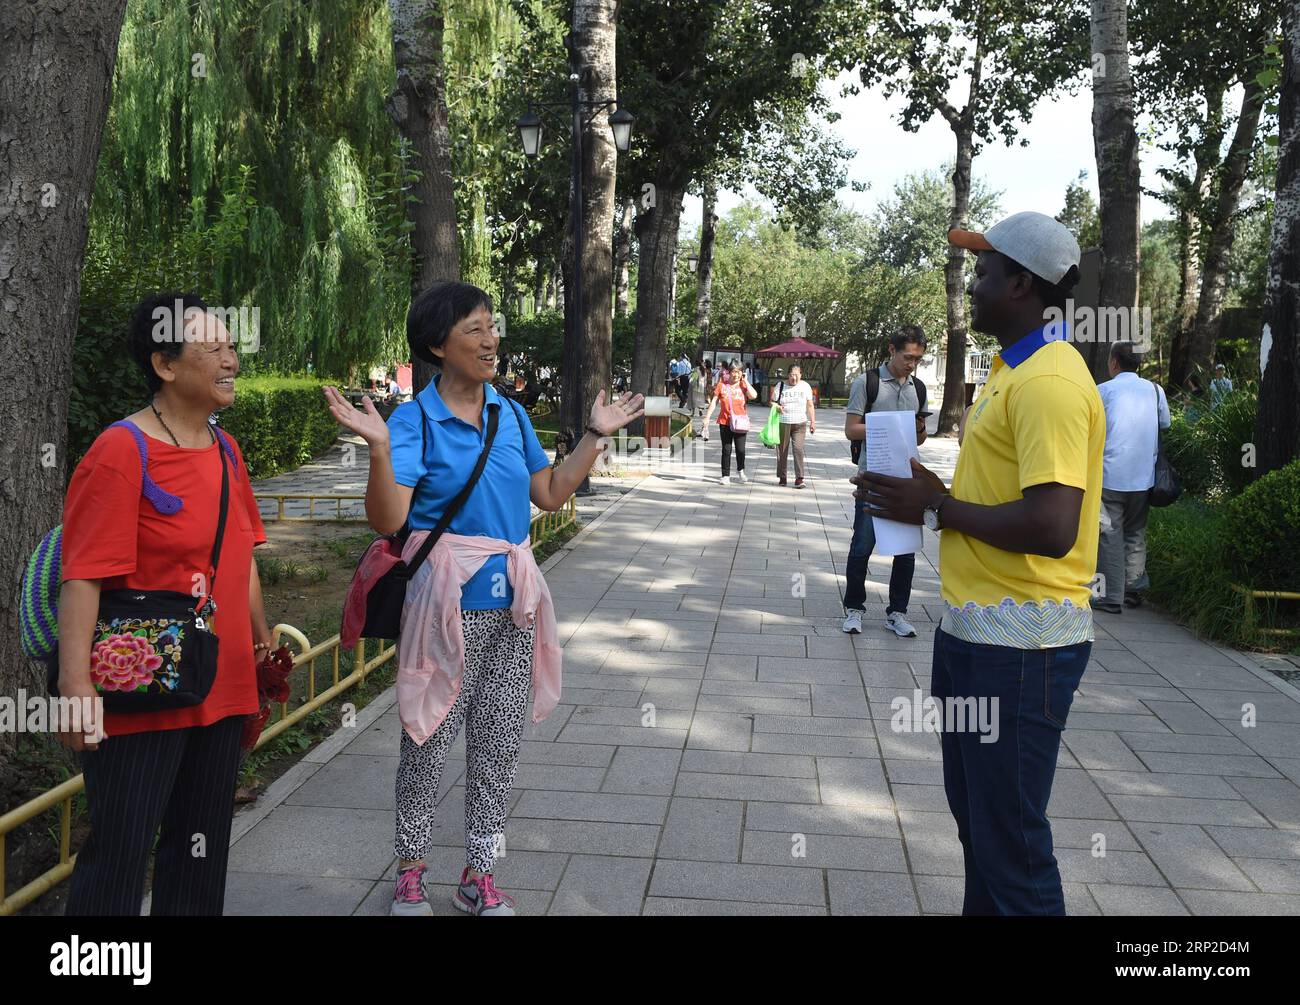 (180831) -- BEIJING, Aug. 31, 2018 -- Yasin Amara Sekou S Dra (R, front), a Malian student studying in China and a volunteer at Yuanmingyuan, or the Old Summer Palace, talks with tourists in the park in Beijing, capital of China, Aug. 31, 2018. Yuanmingyuan set up its volunteer team in 2017 and has been recruiting volunteers from the public. In July 2018, about 20 overseas students from Africa joined the team to provide tourist services. ) (lmm) CHINA-BEIJING-YUANMINGYUAN PARK-AFRICAN VOLUNTEERS (CN) LuoxXiaoguang PUBLICATIONxNOTxINxCHN Stock Photo